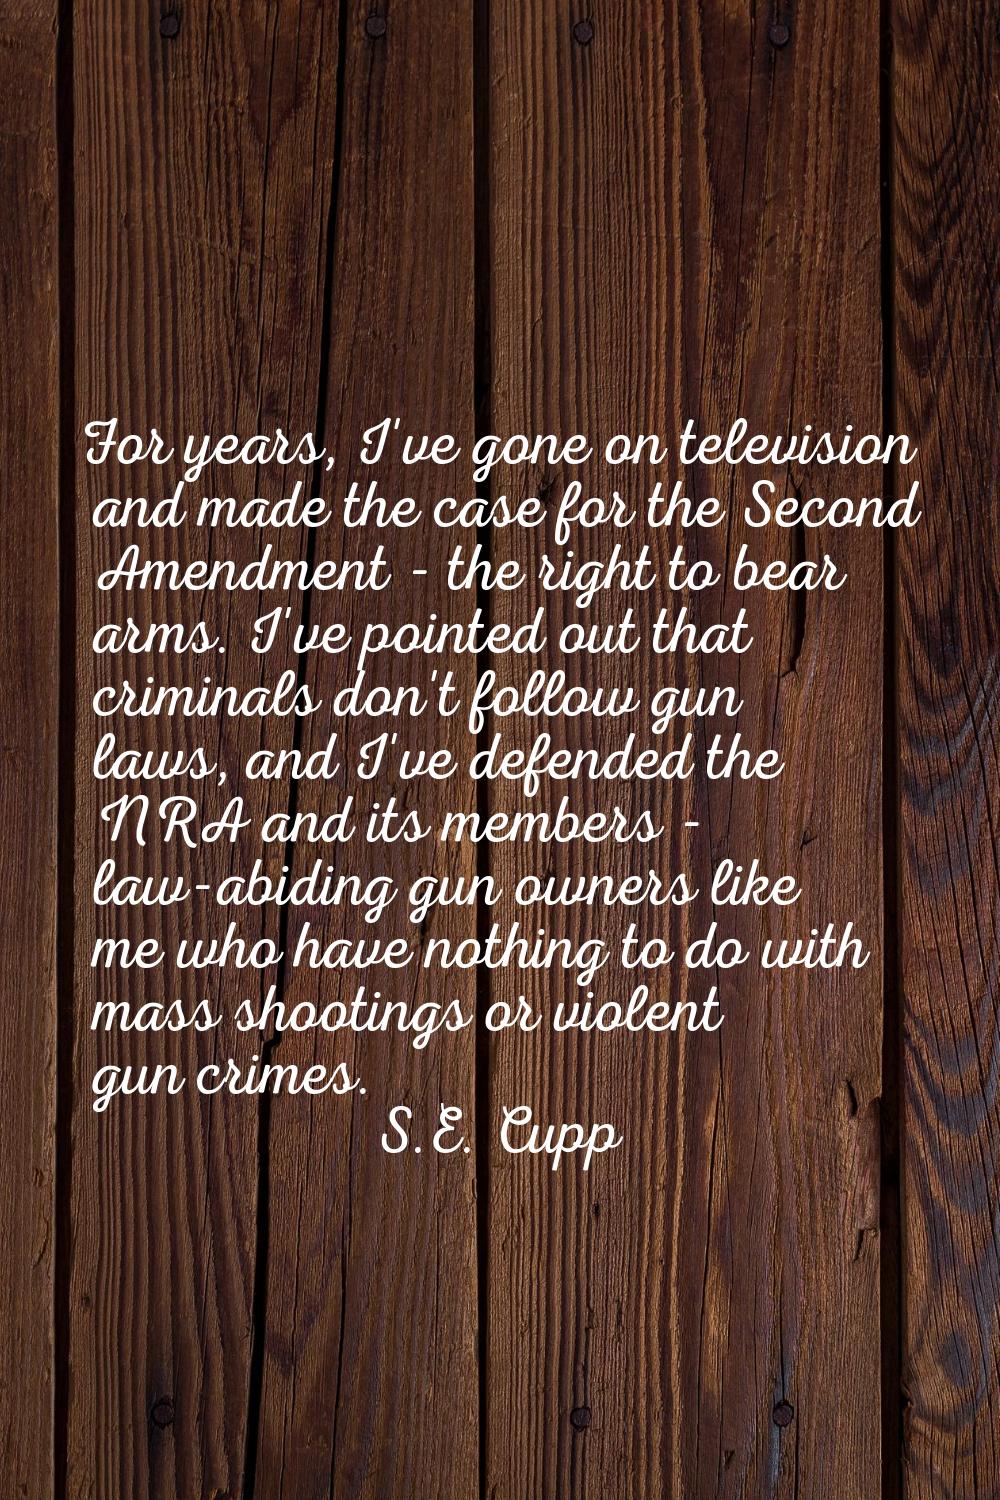 For years, I've gone on television and made the case for the Second Amendment - the right to bear a